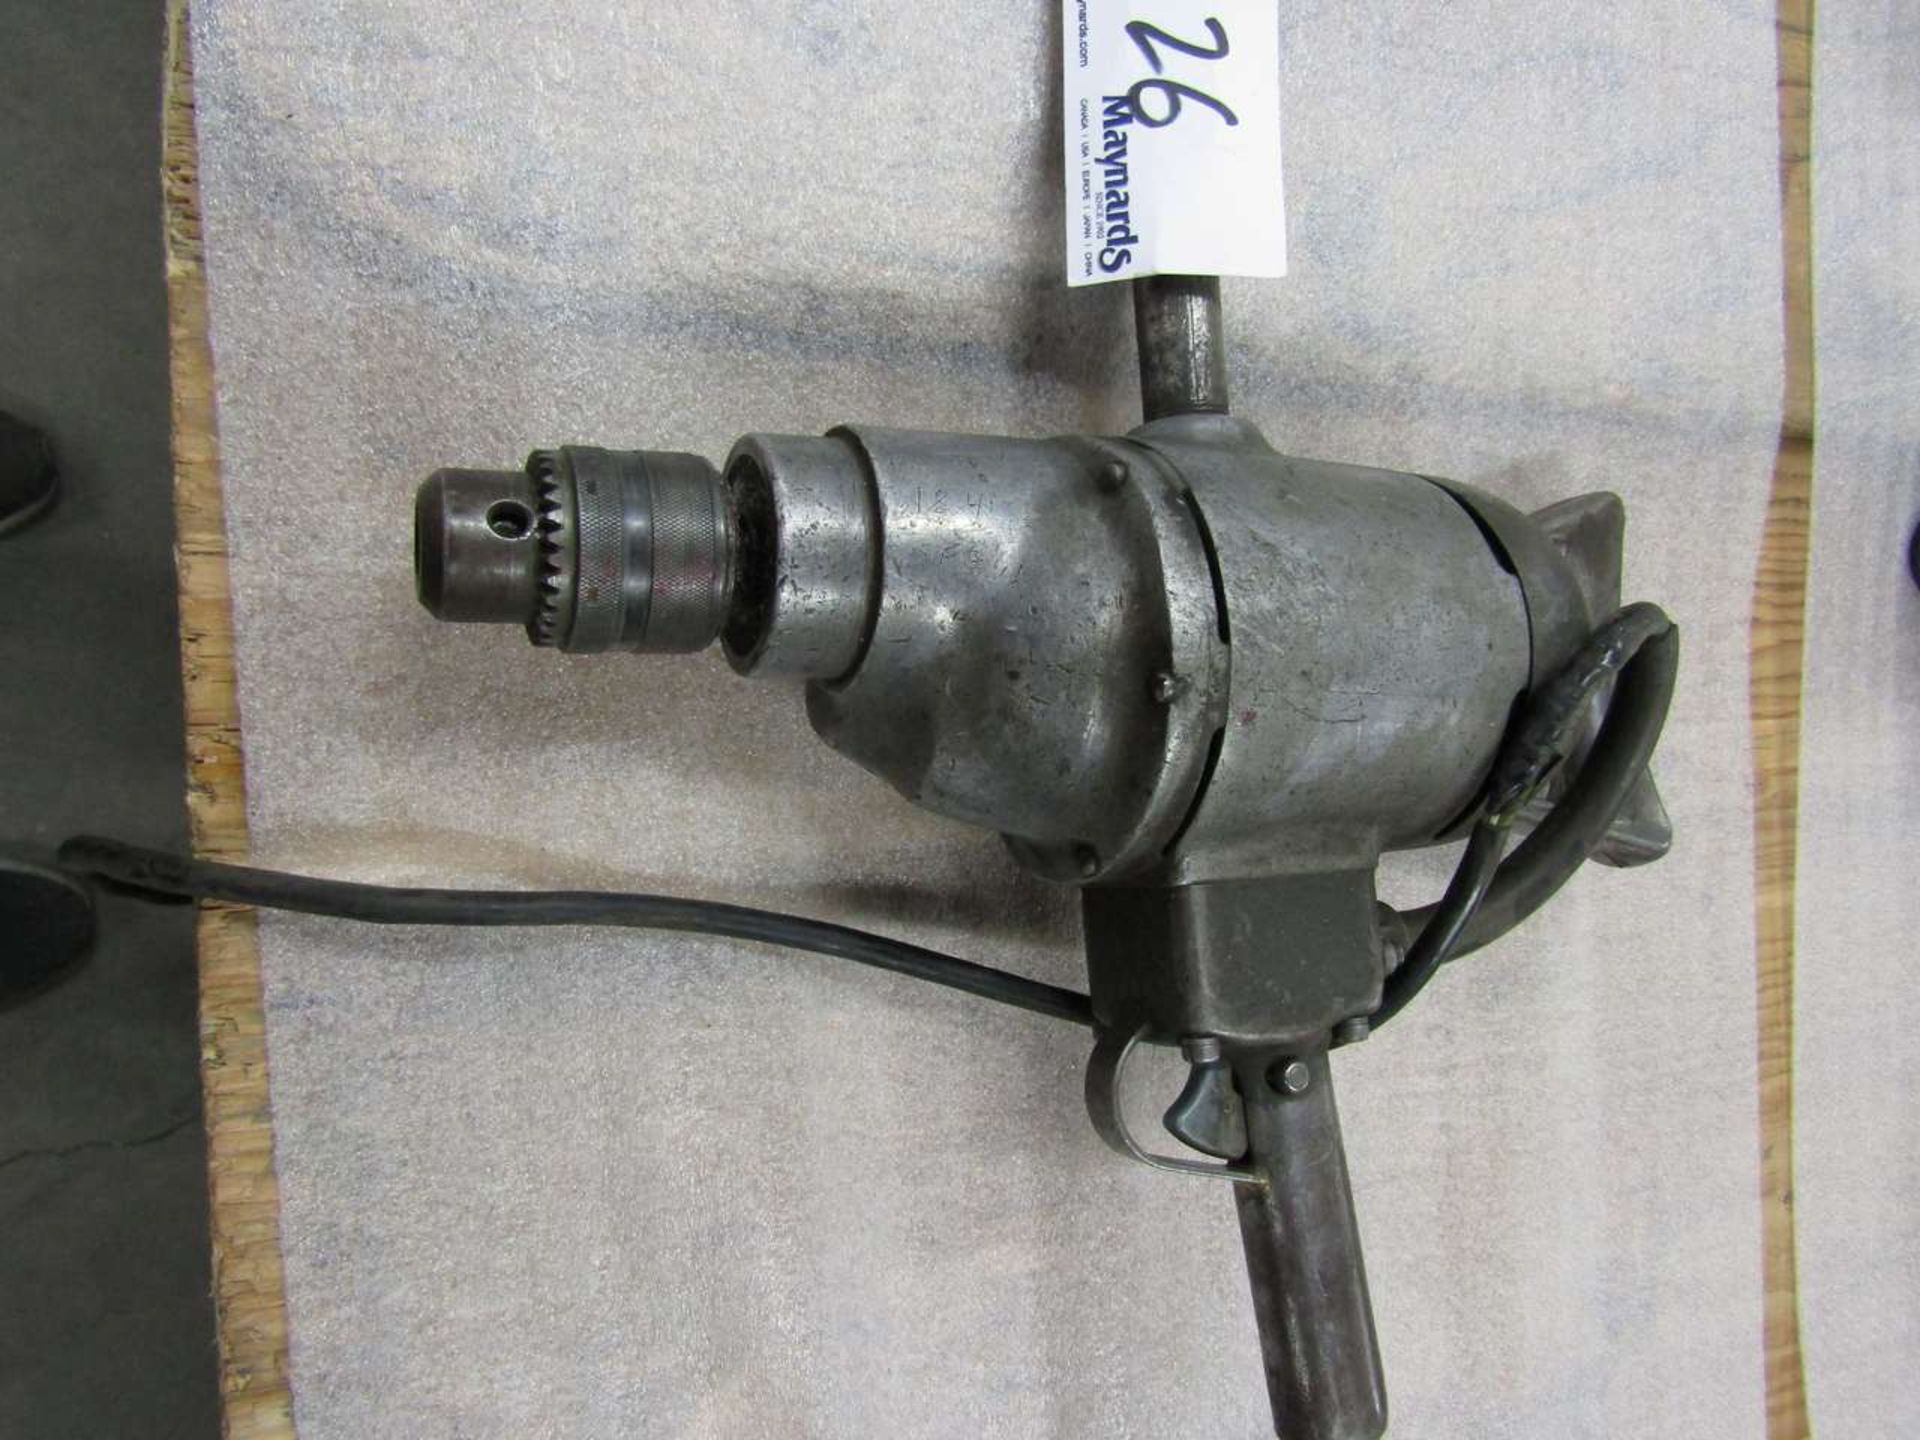 Large Impact drill